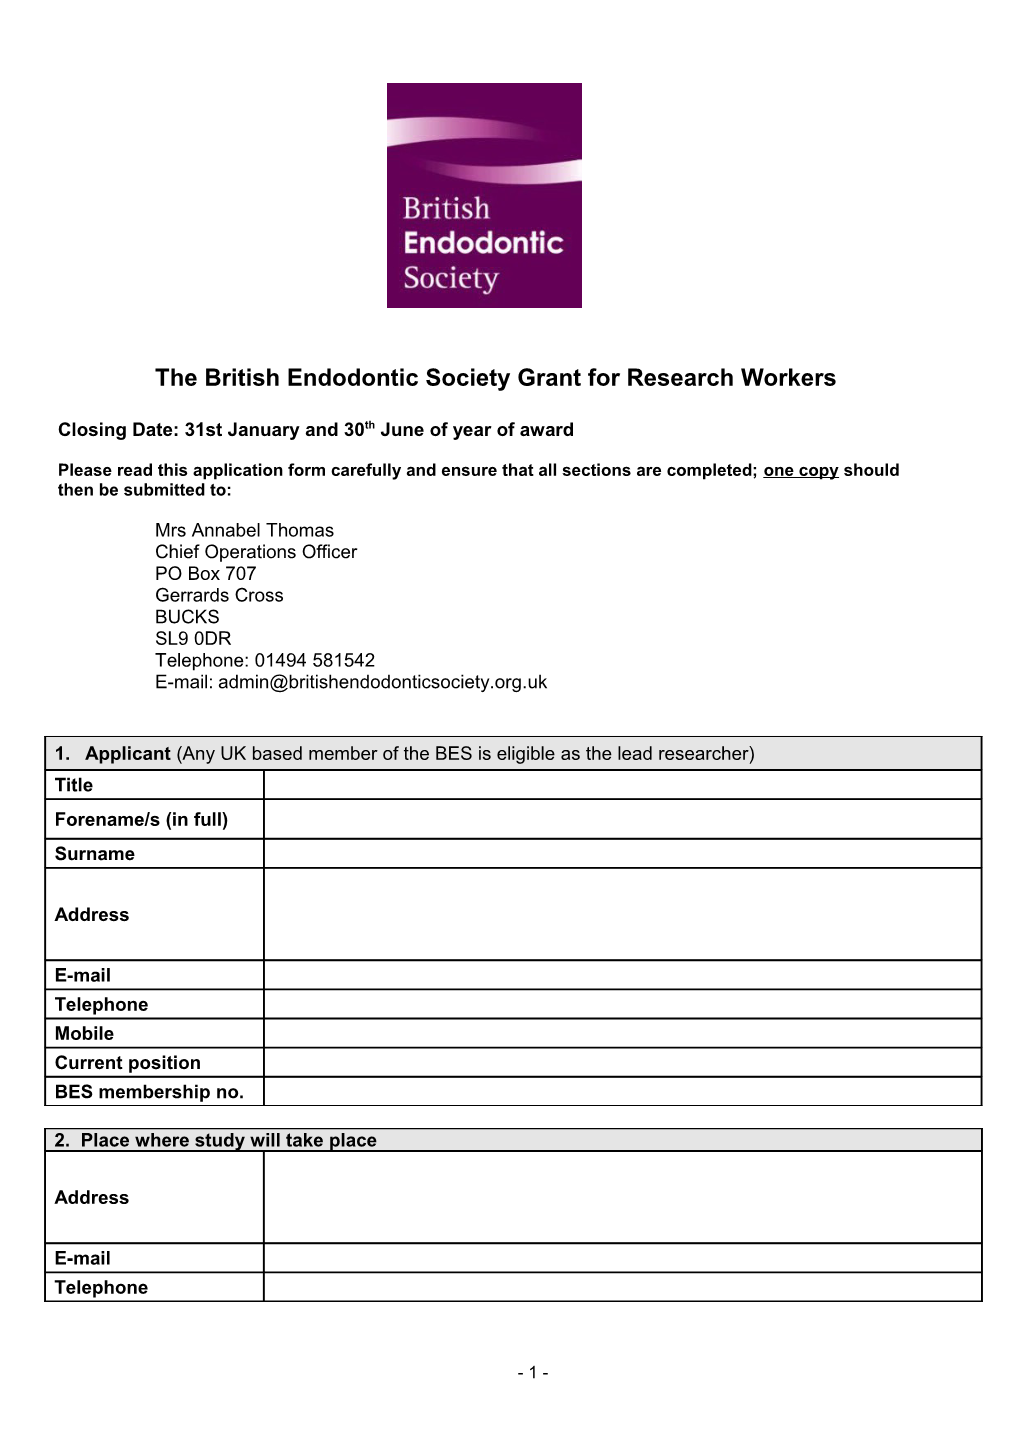 The British Endodontic Society Grant for Research Workers